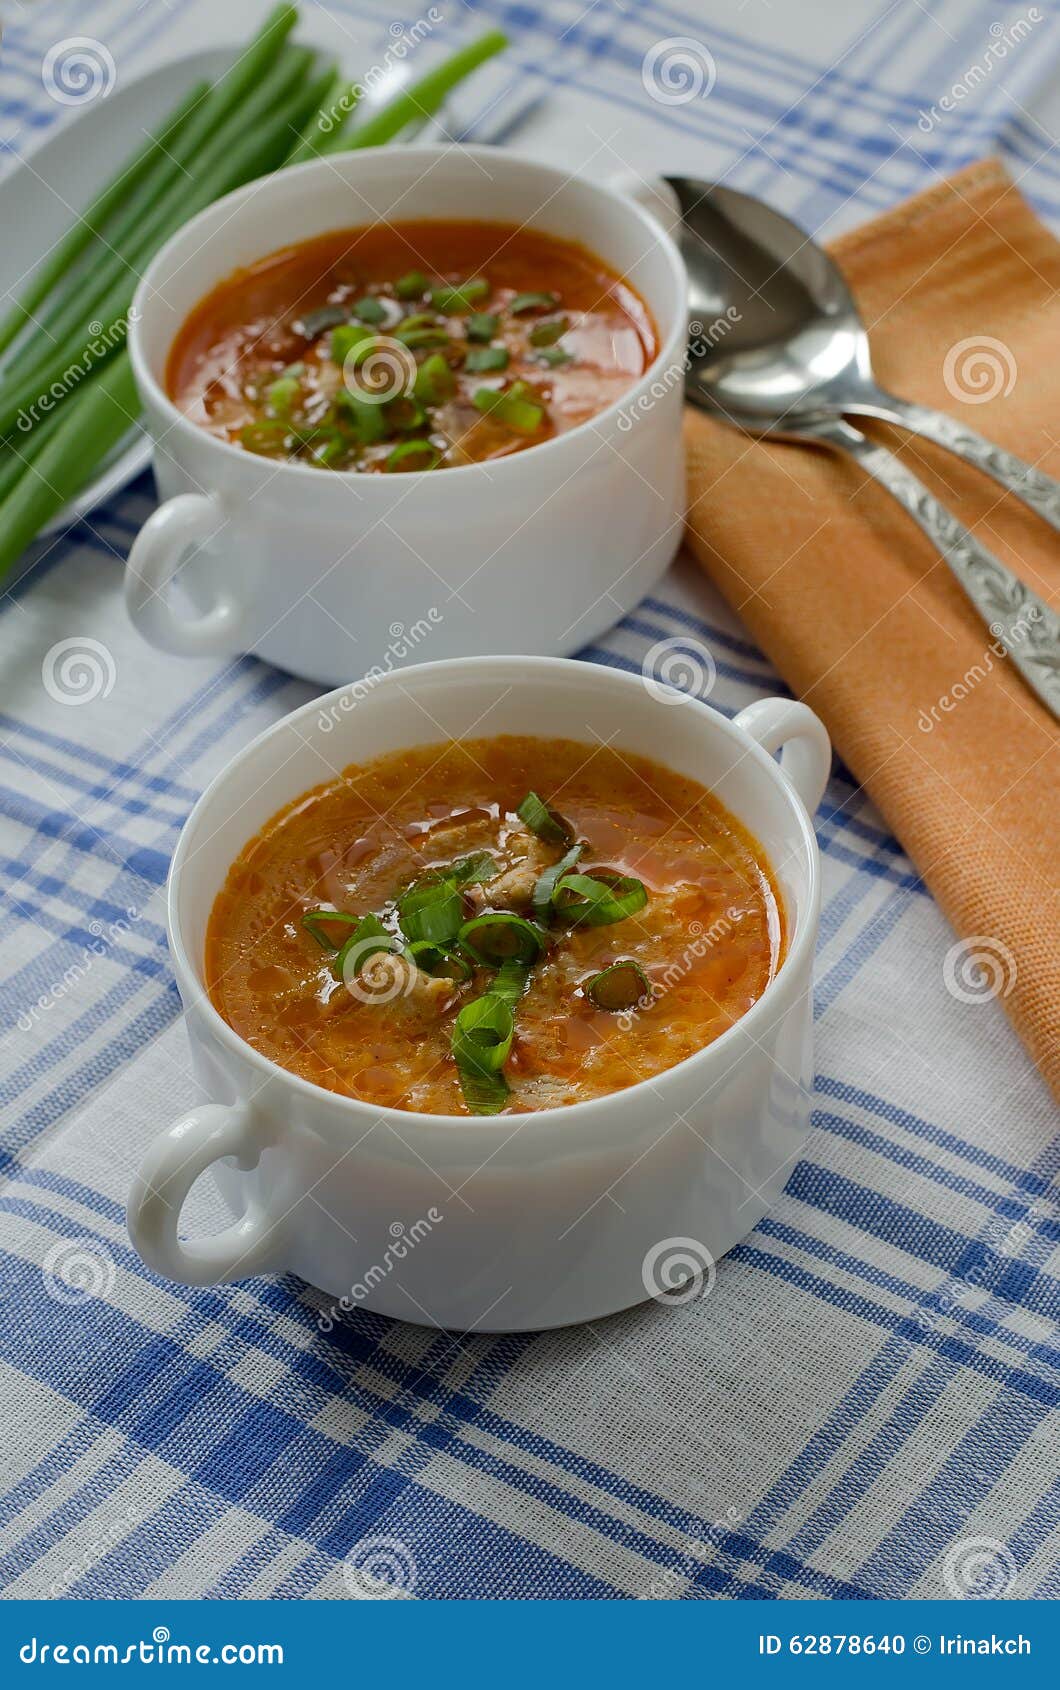 Tomato Soup With Rice And Meat Stock Photo - Image of ...